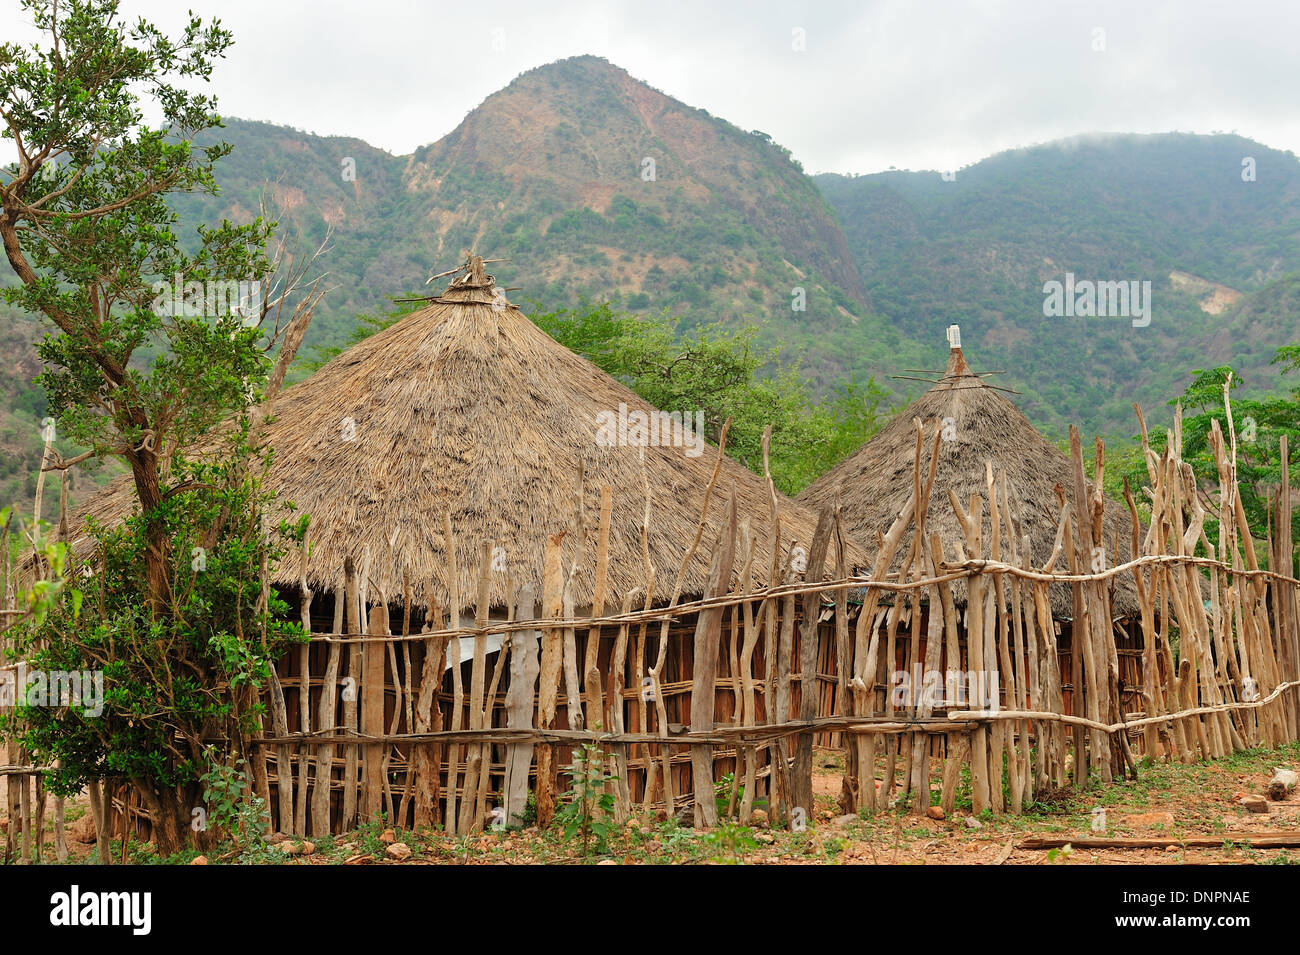 Typical rounded Djiboutian huts in a village in the Day forest in Djibouti, Horn of Africa Stock Photo